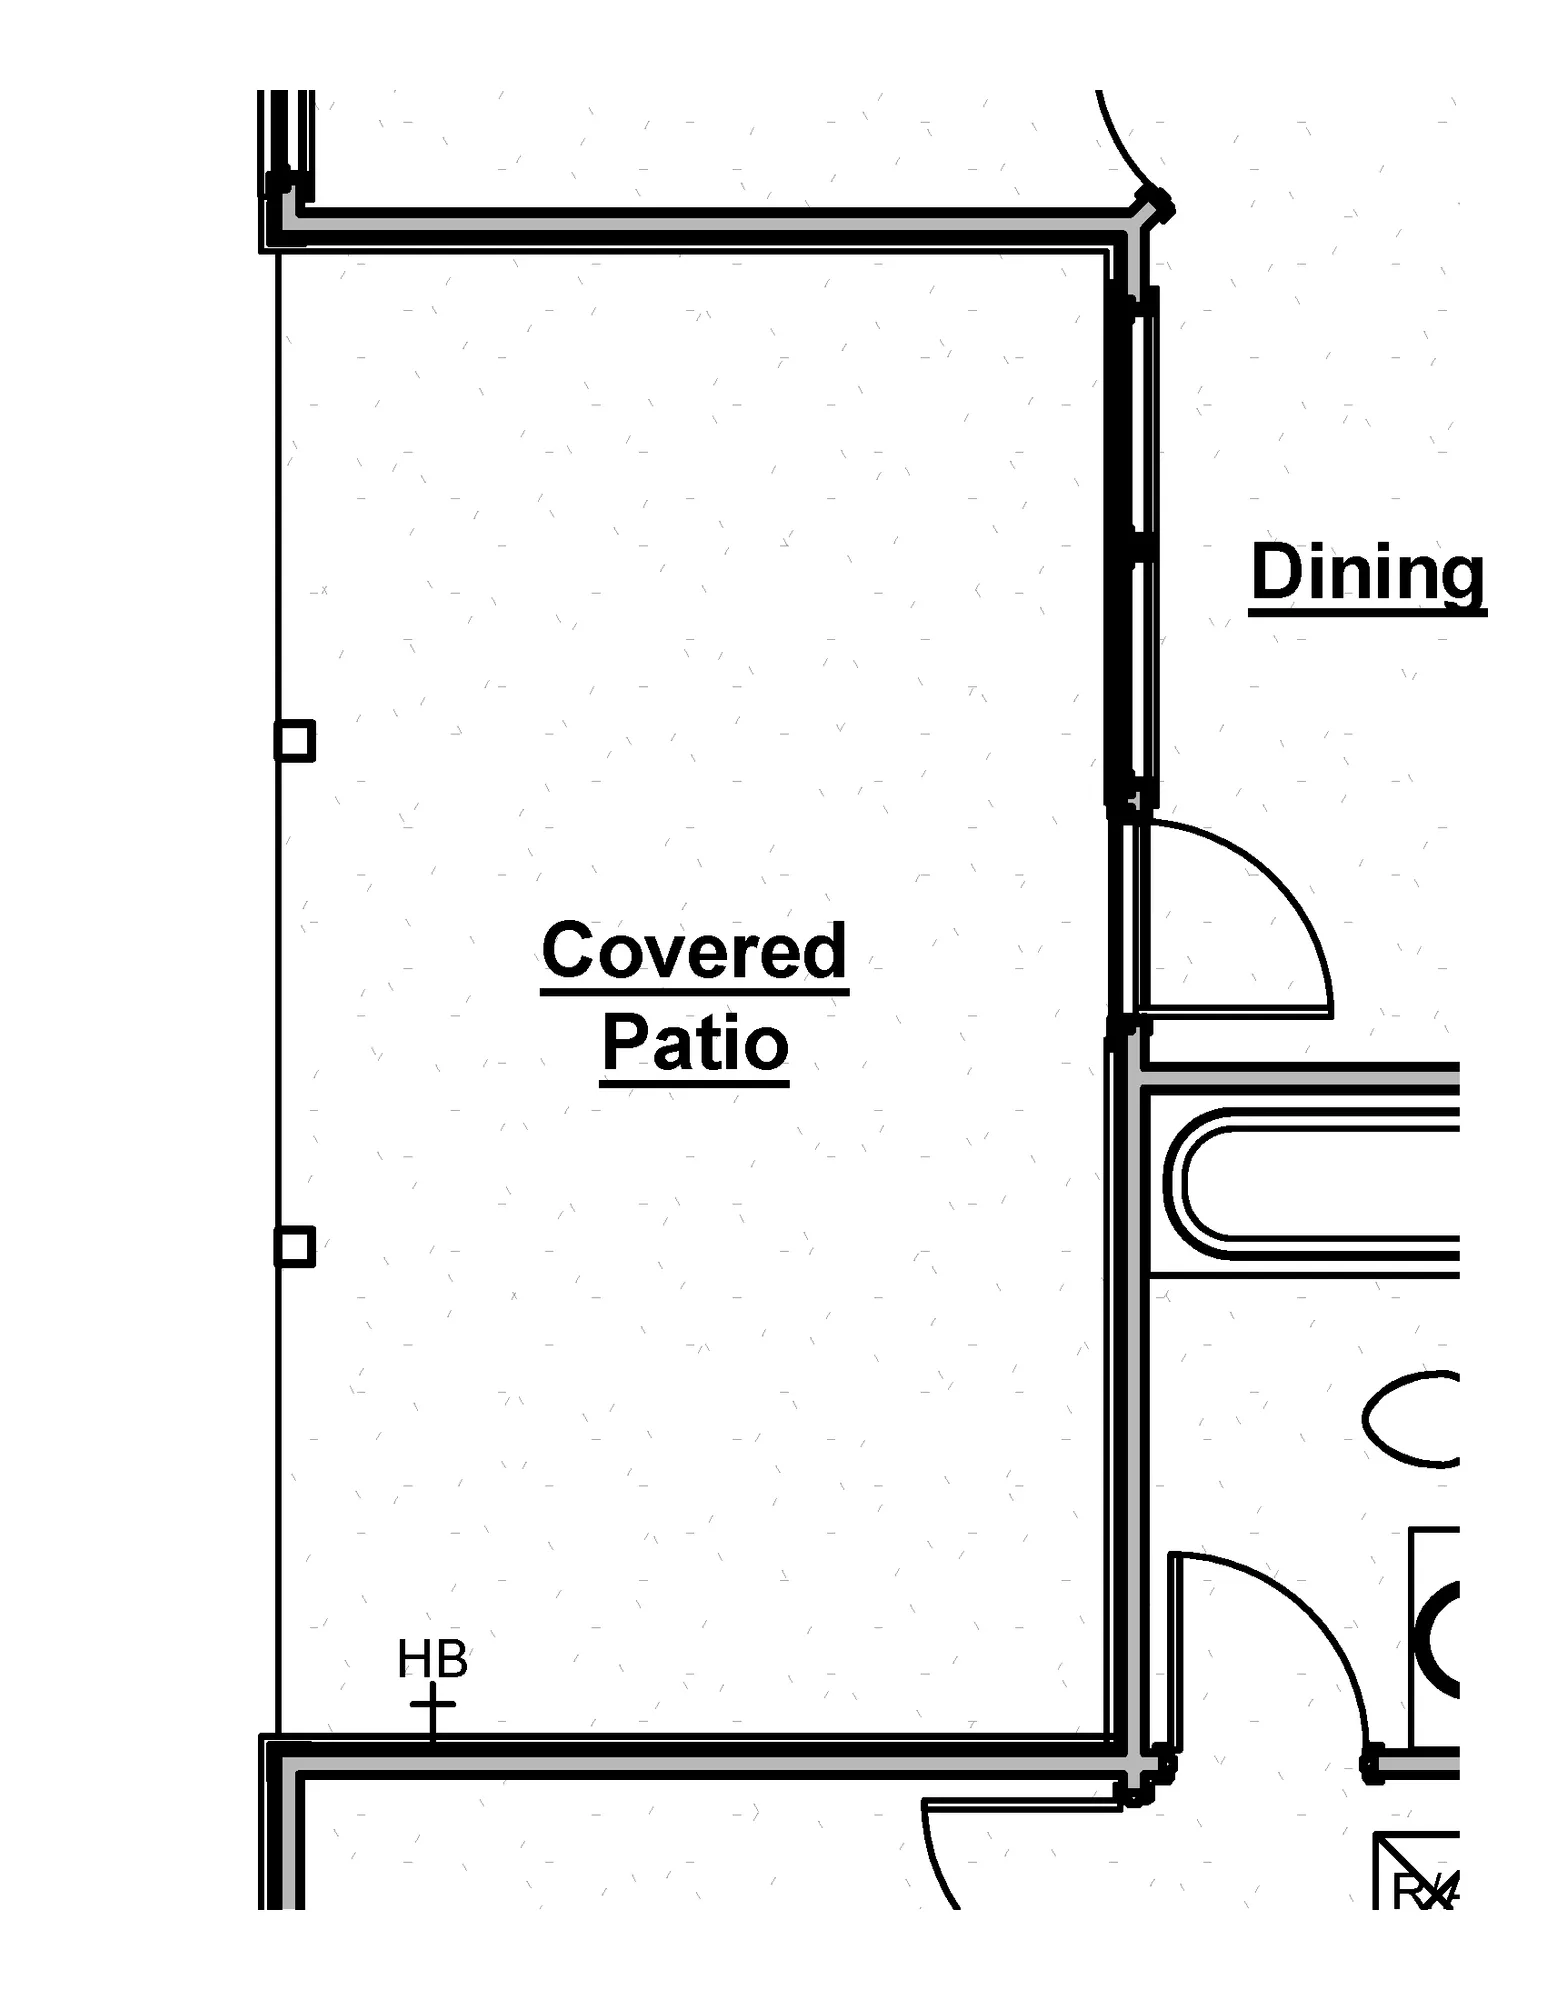 Covered Patio - undefined